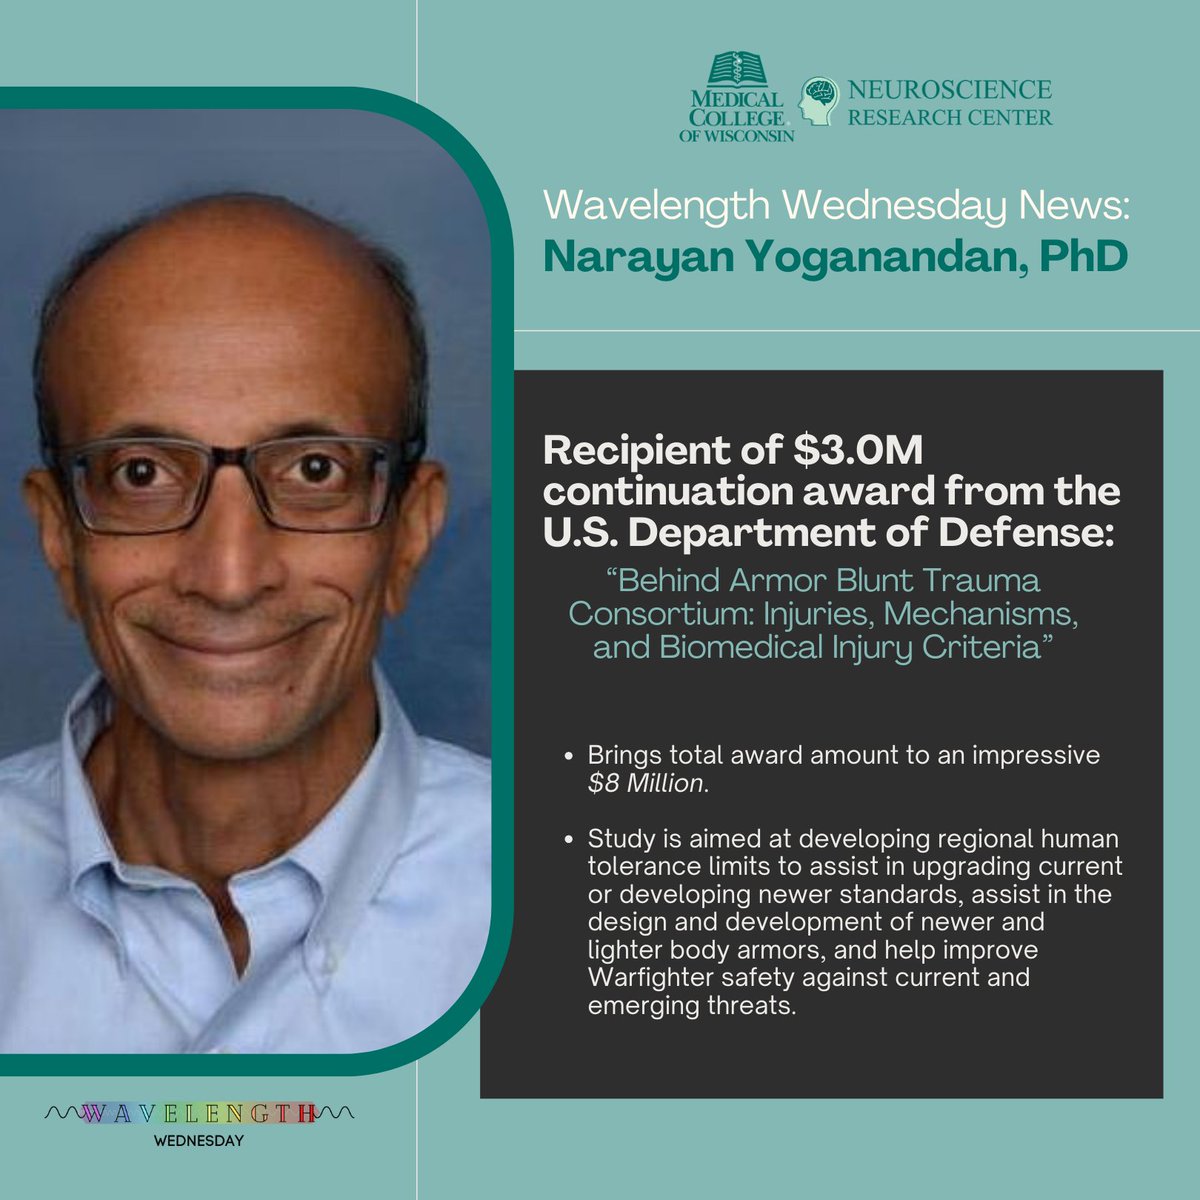 Happy Wednesday! For today's #WLW, congrats to NRC Member Dr. Narayan Yoganandan of @MCWNeurosurgery, along w/ Dr. Brian Stemper of @MU_MCW_BME and researchers at @DukeU & U. of Virginia on their continuation award from the @DeptofDefense! Making strides in enhancing safety!💪